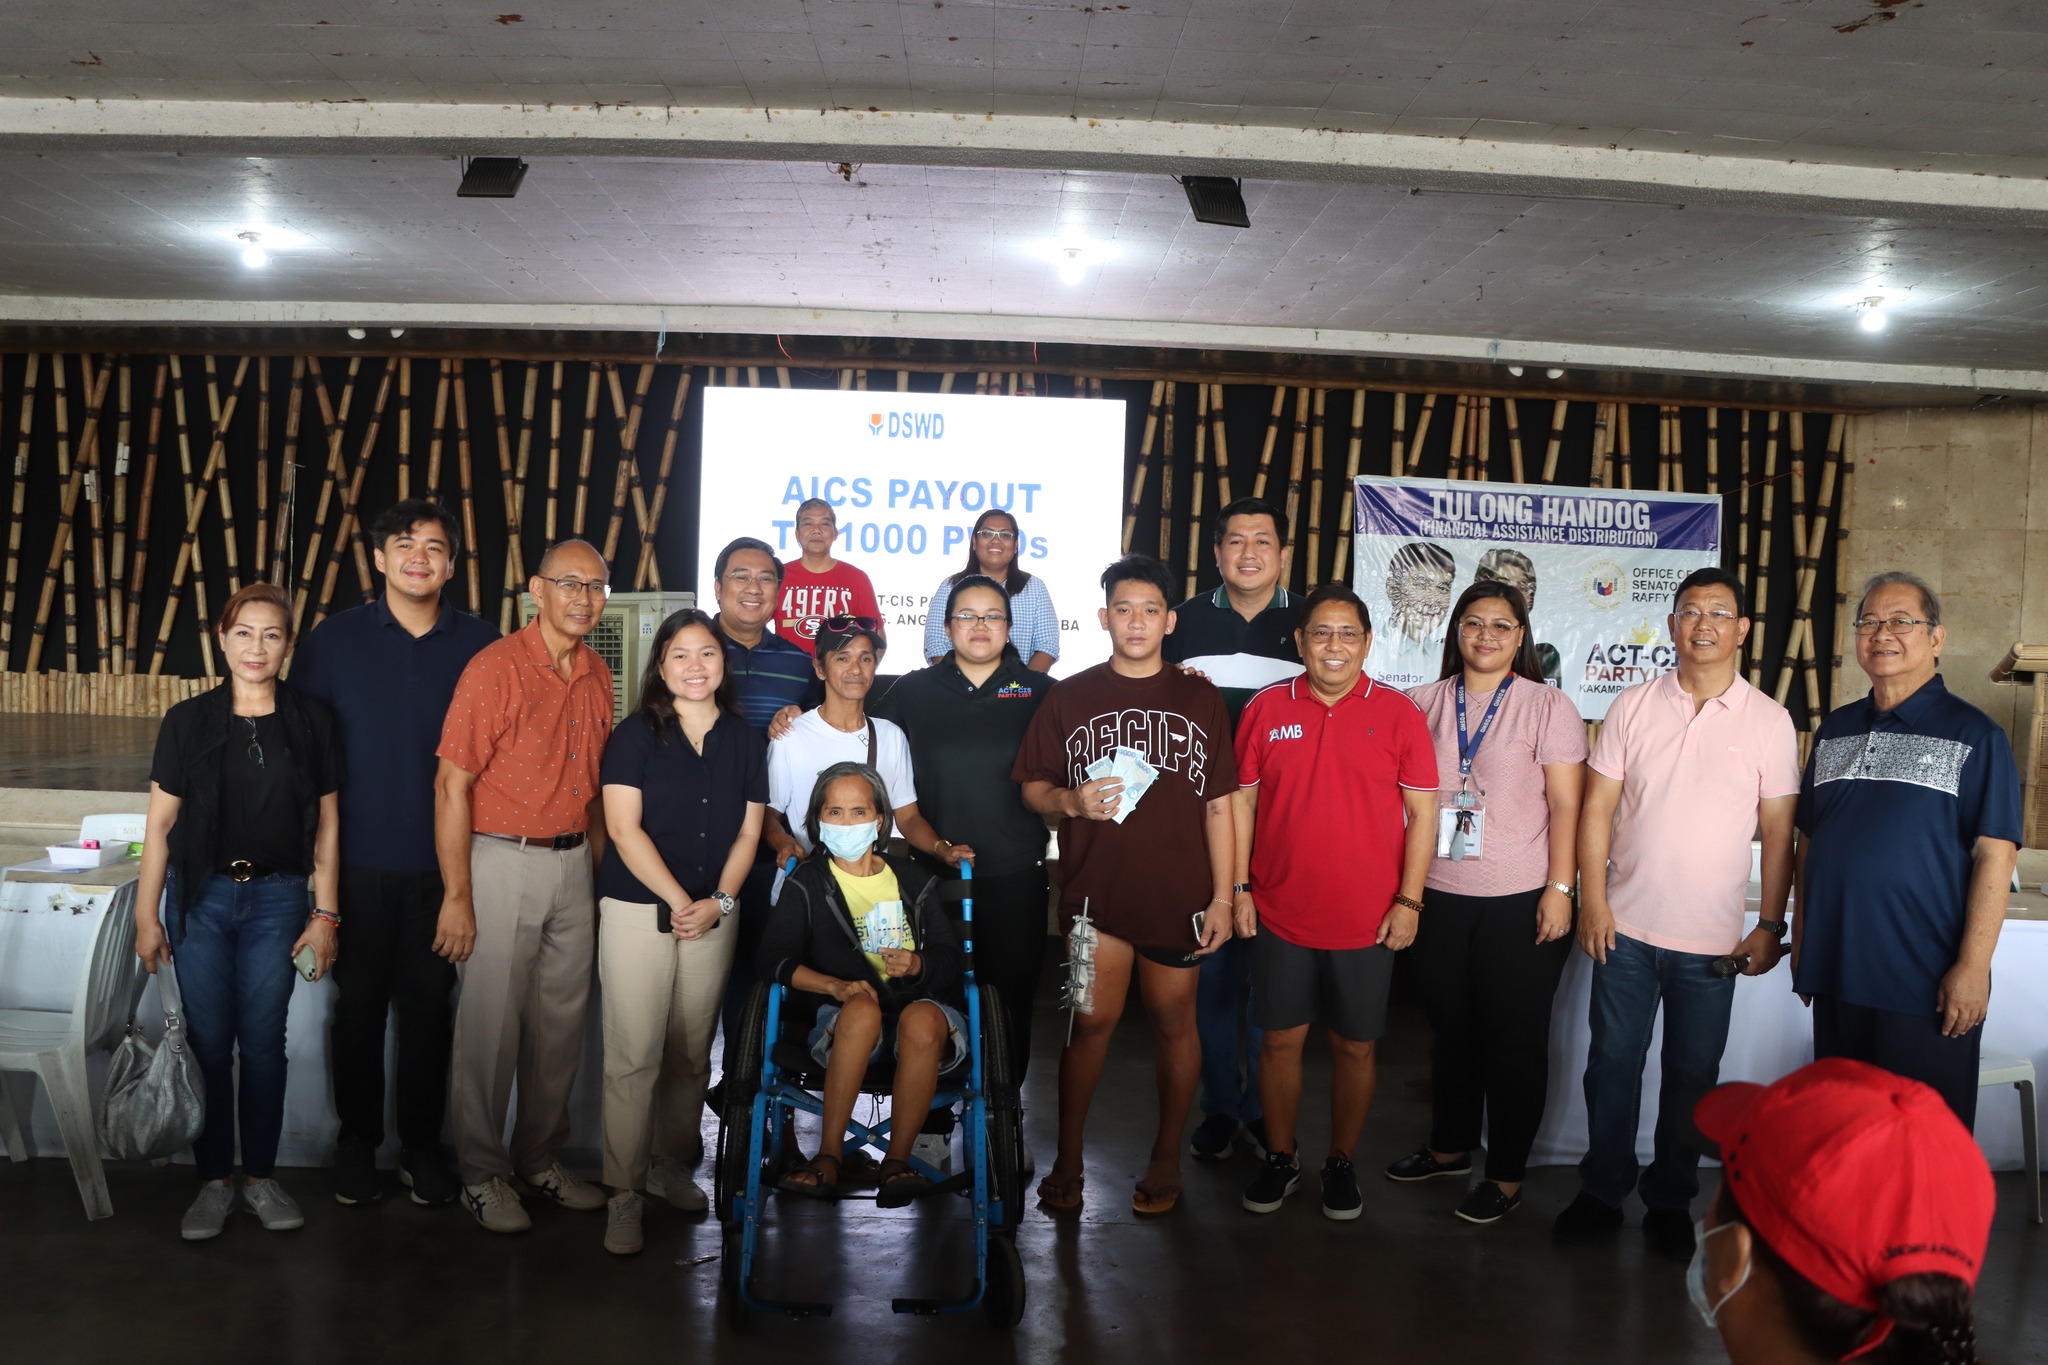 AICS PAYOUT TO 1000 PWDs